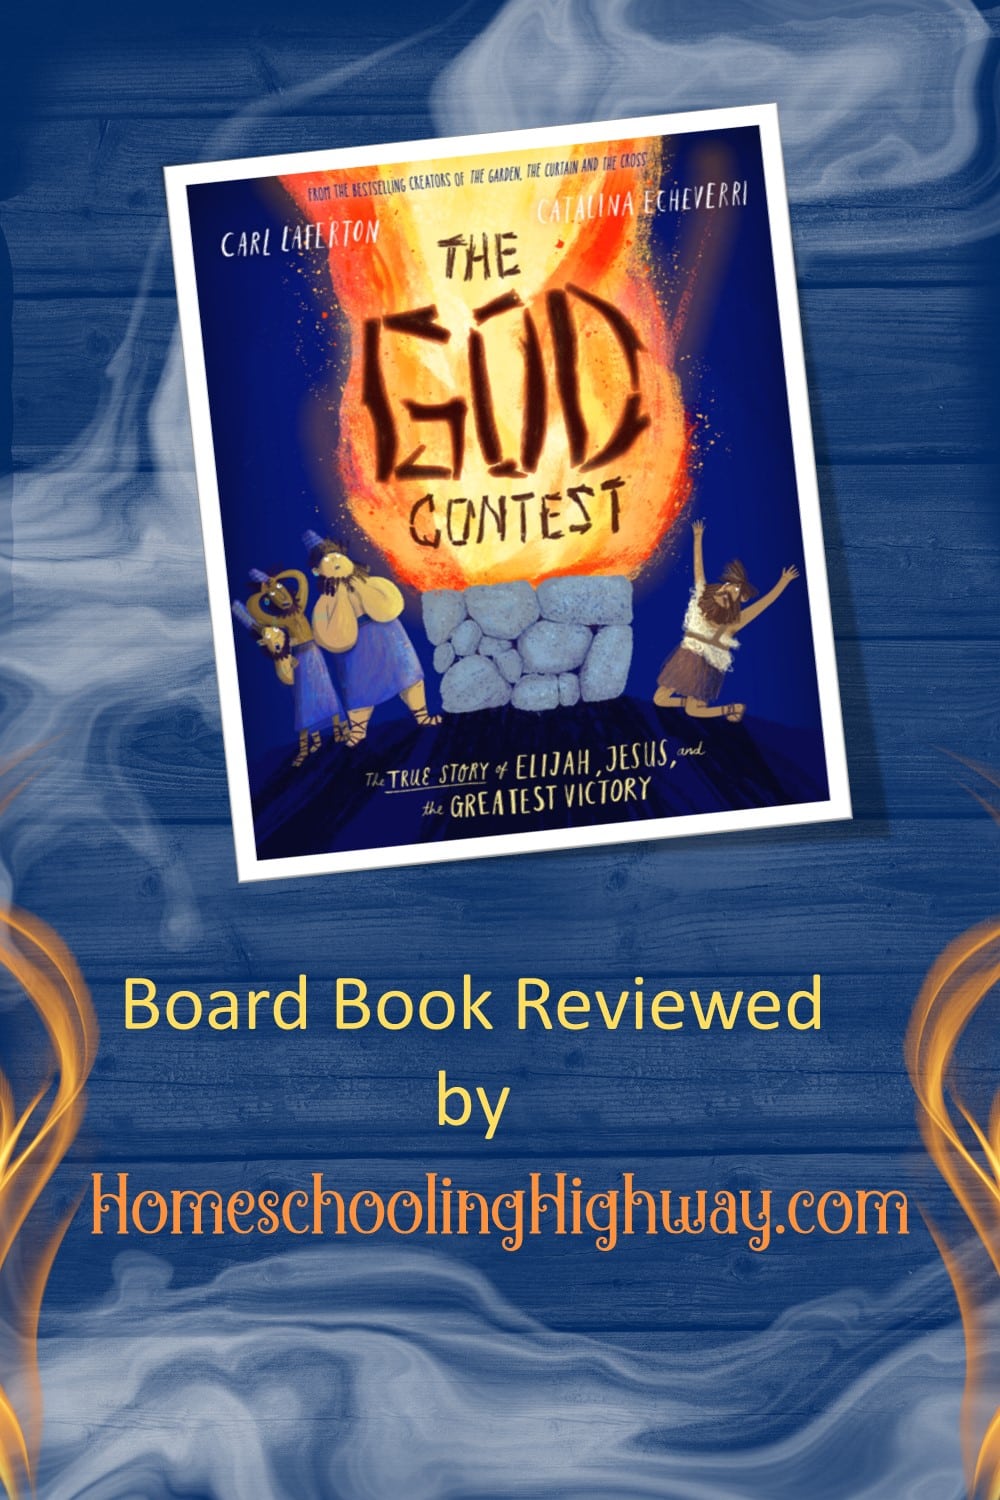 The God Contest written by Carll Laferton Reviewed by Homeschooling Highway